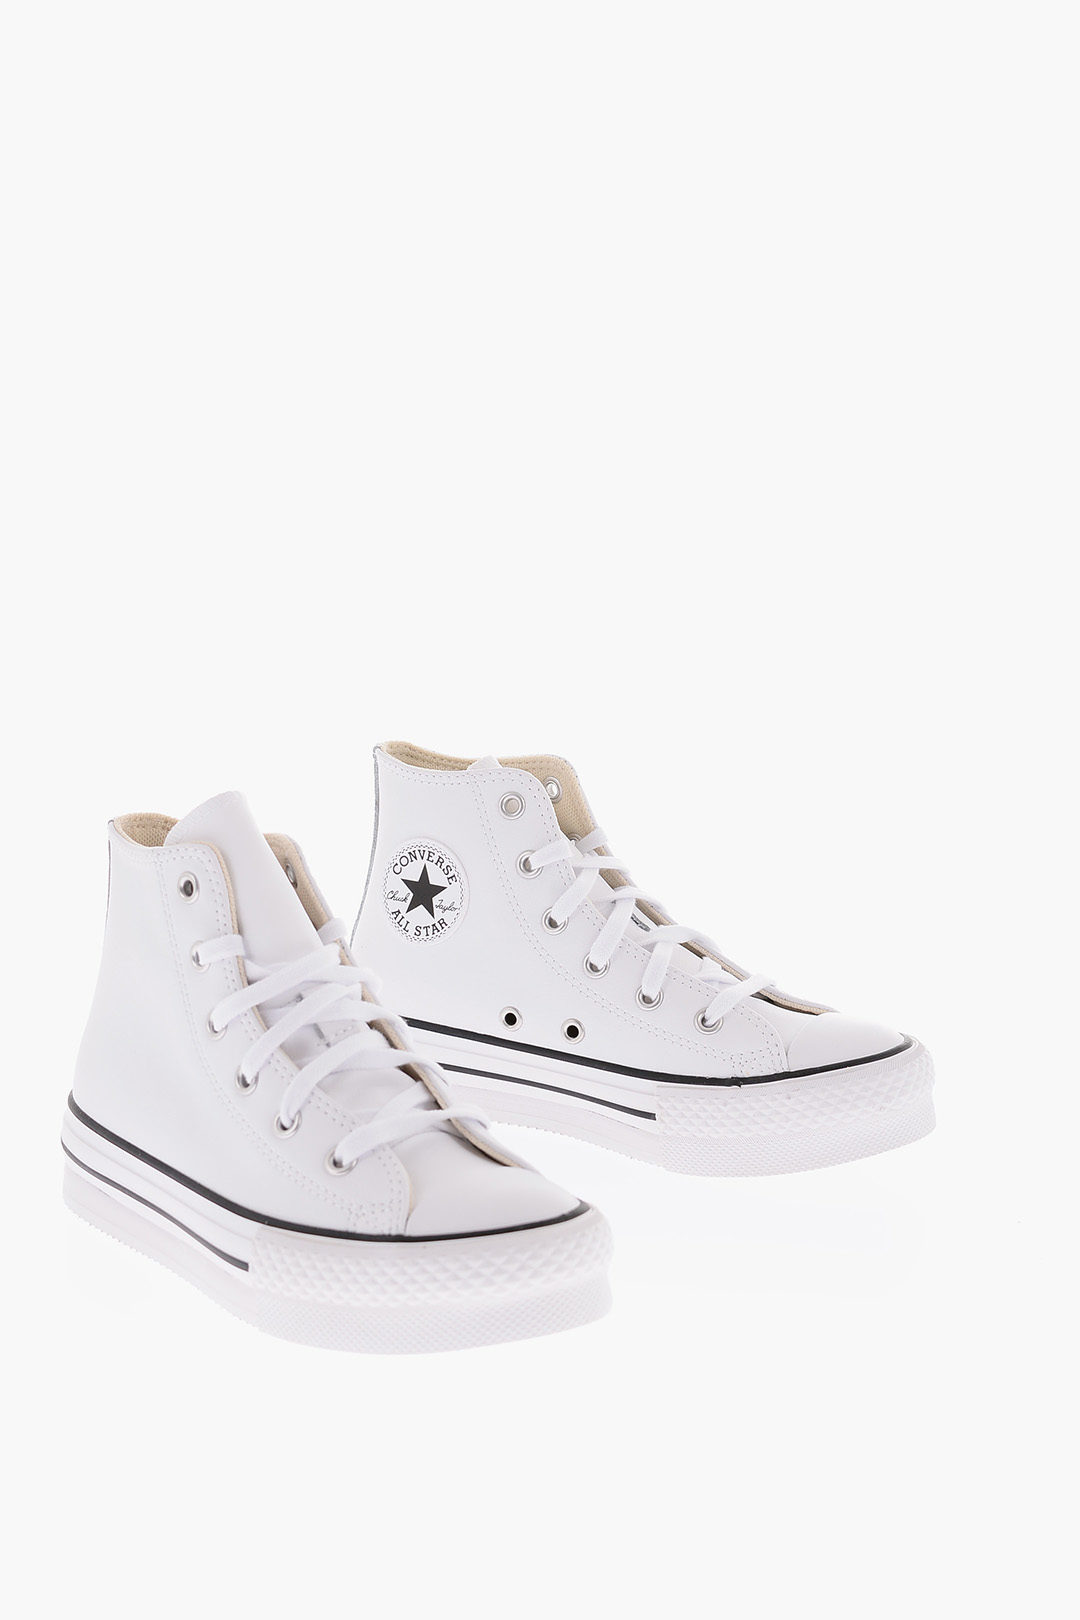 Converse KIDS ALL STAR CHUCK Leather High Sneakers boys Glamood Outlet